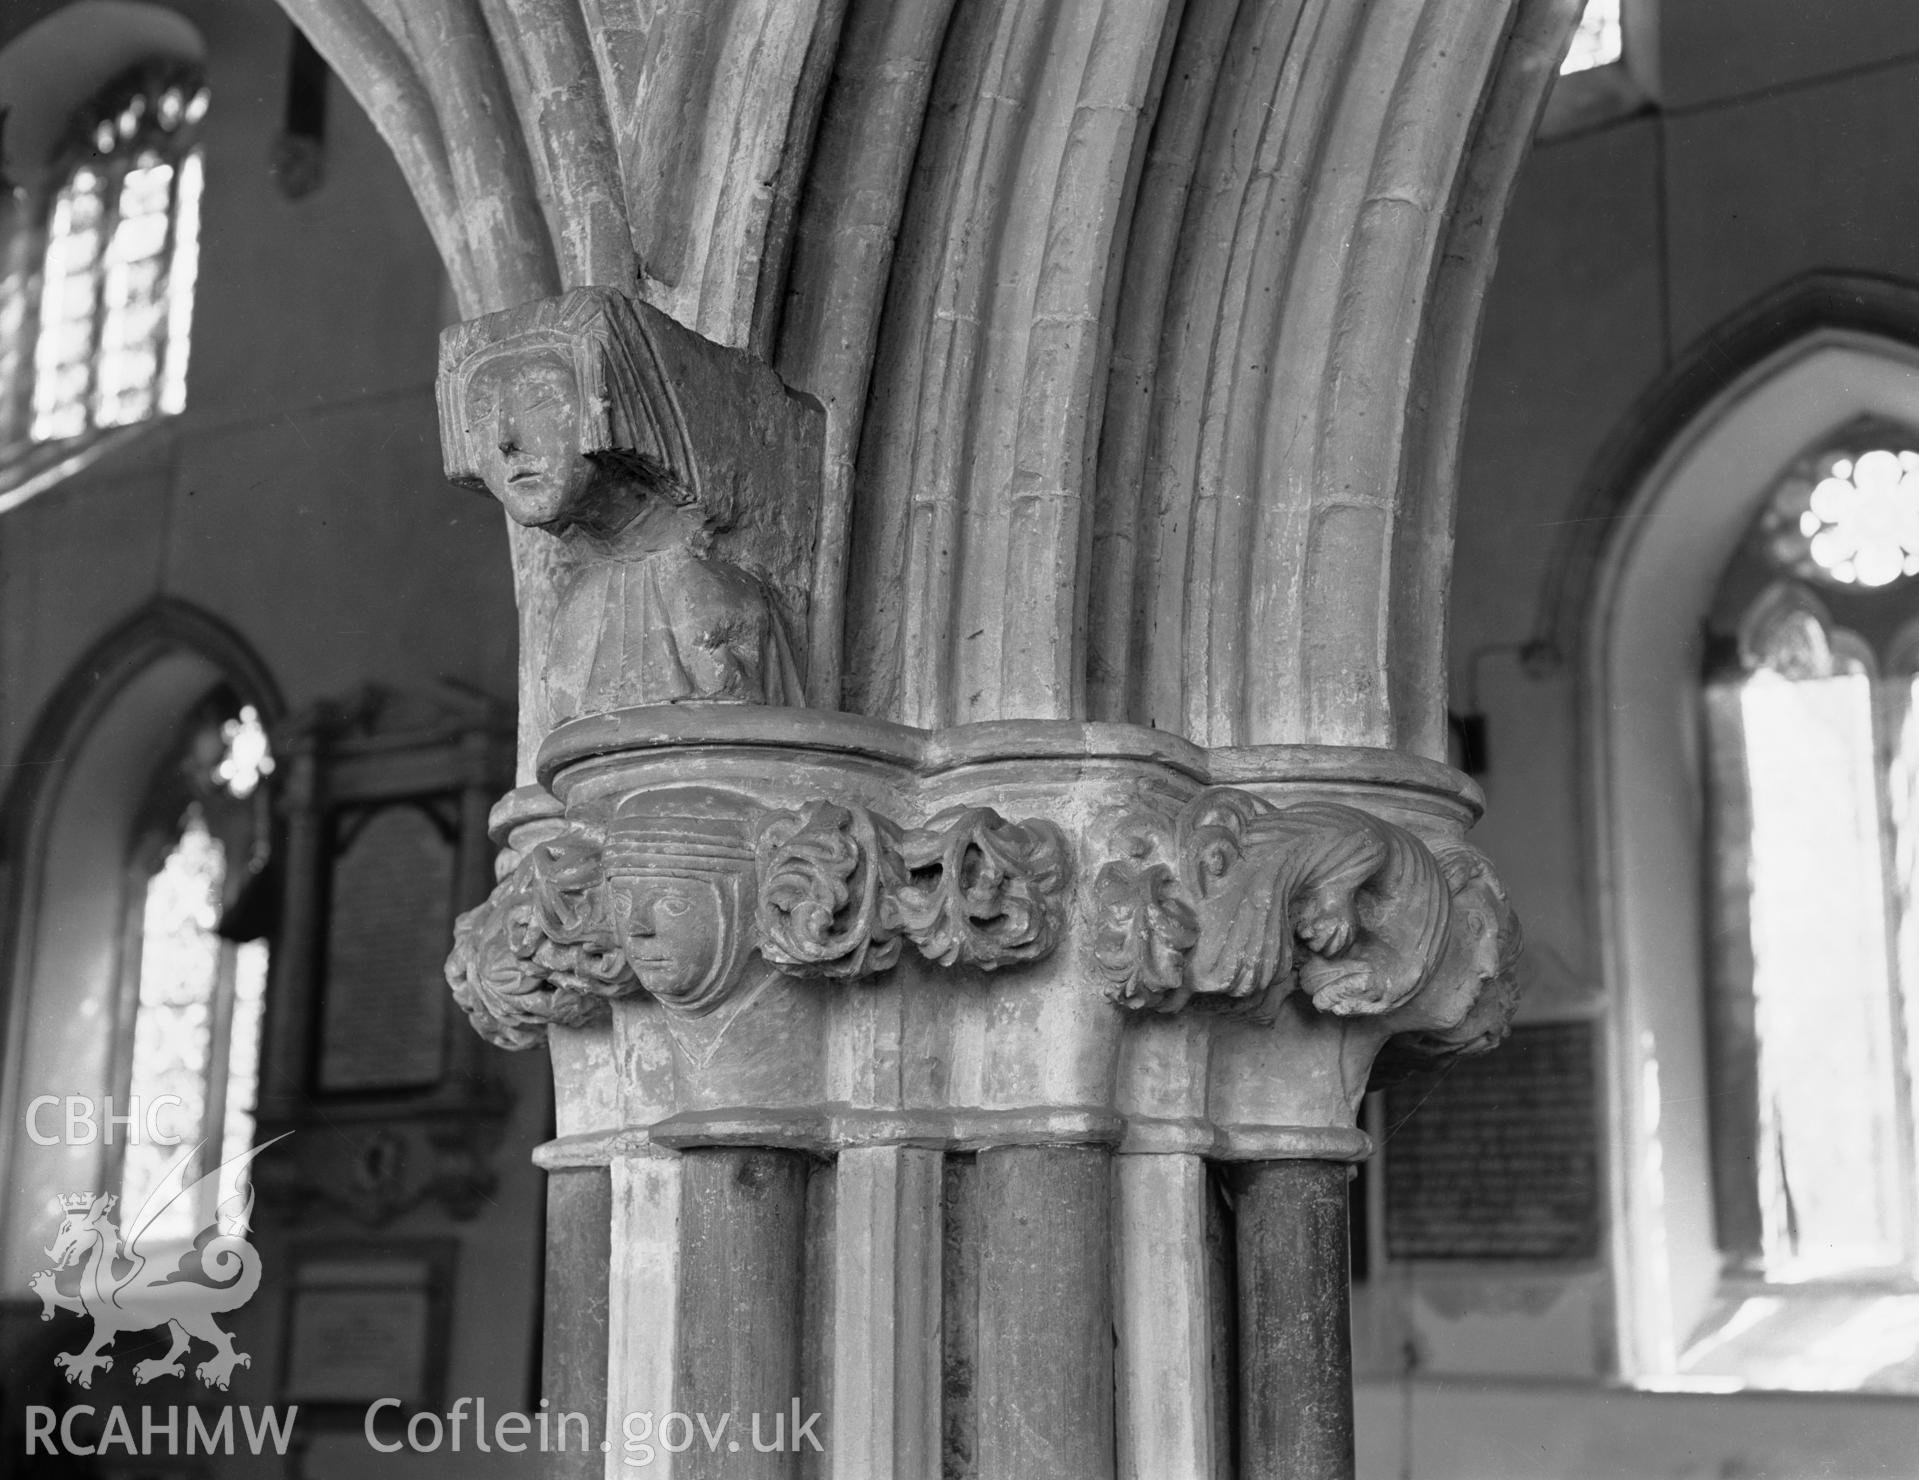 View of corbel at the east end of the north aisle in St Marys Church